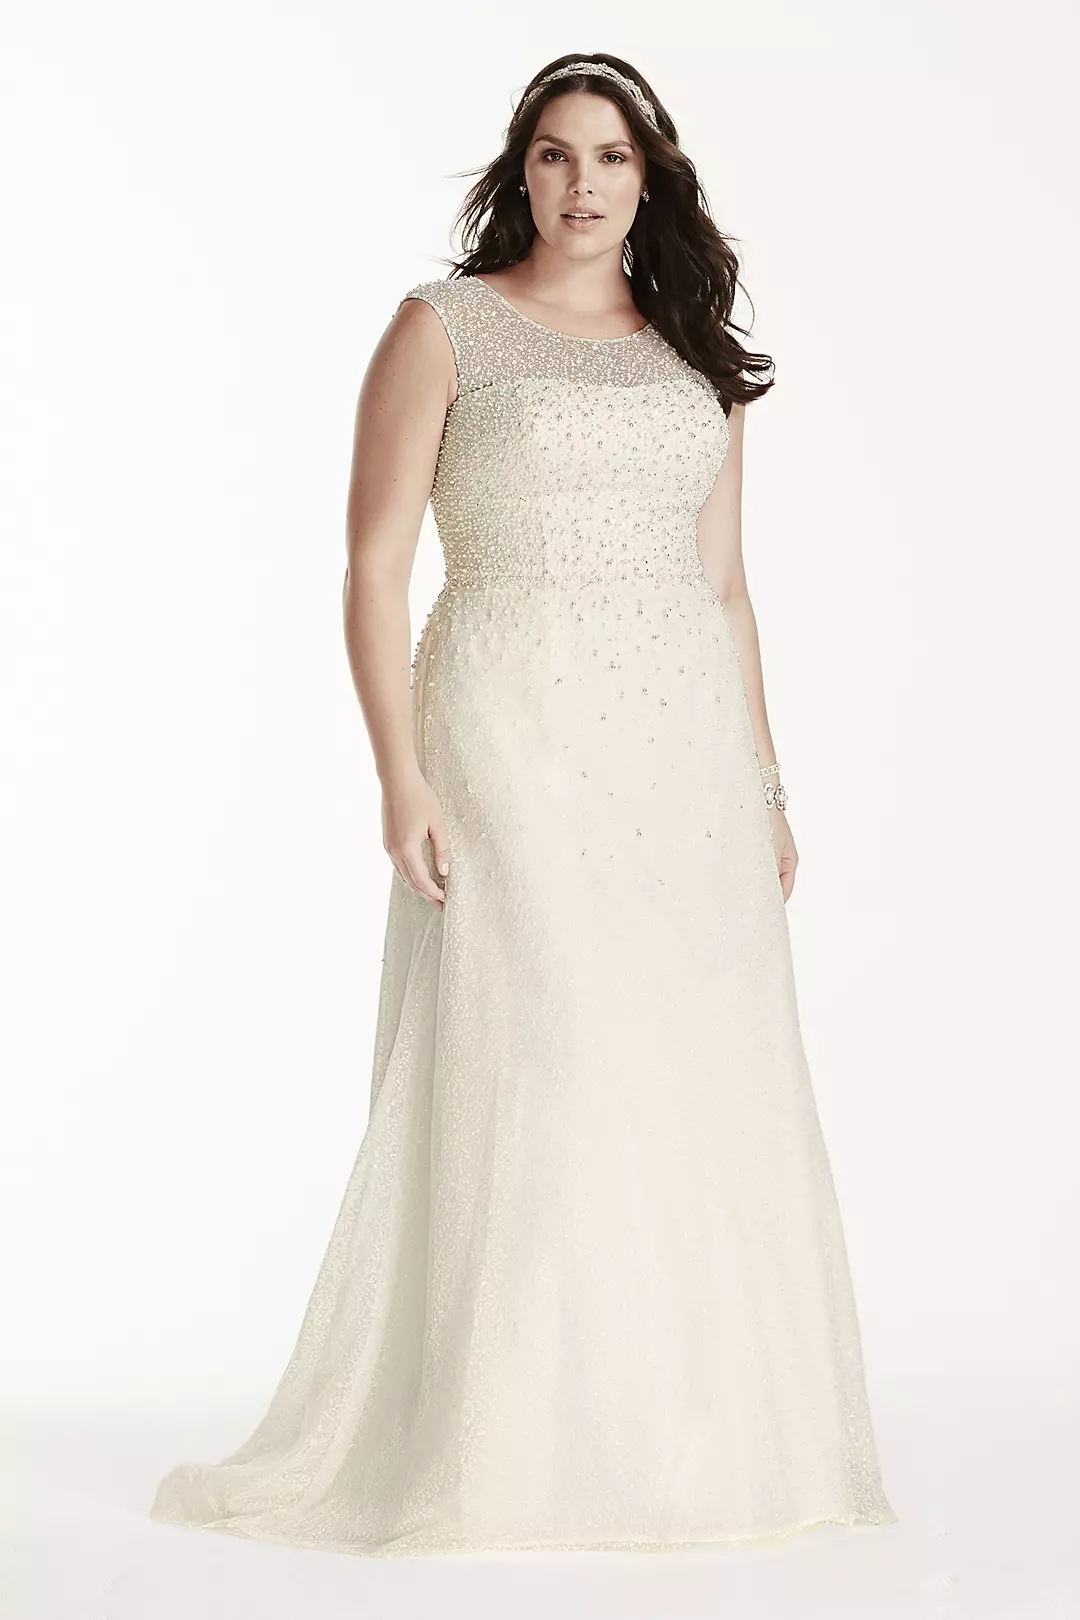 Jewel Cap Sleeve Wedding Dress with Pearl Details Image